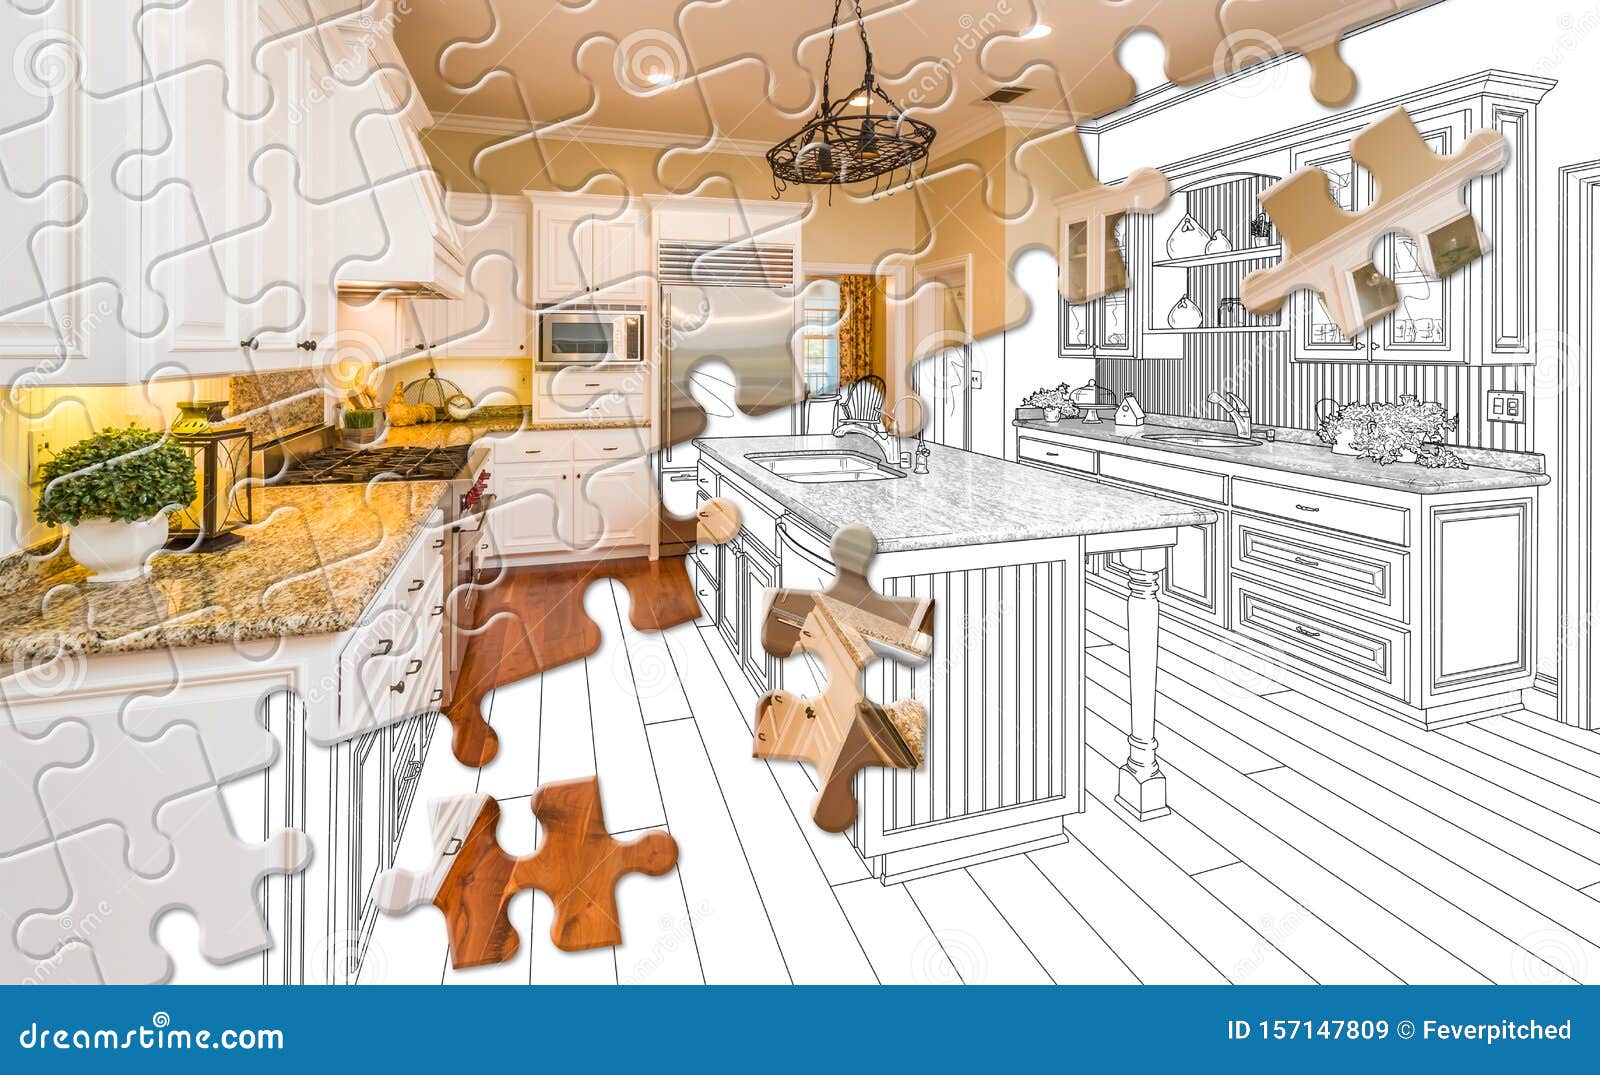 puzzle pieces fitting together revealing finished kitchen build over drawing